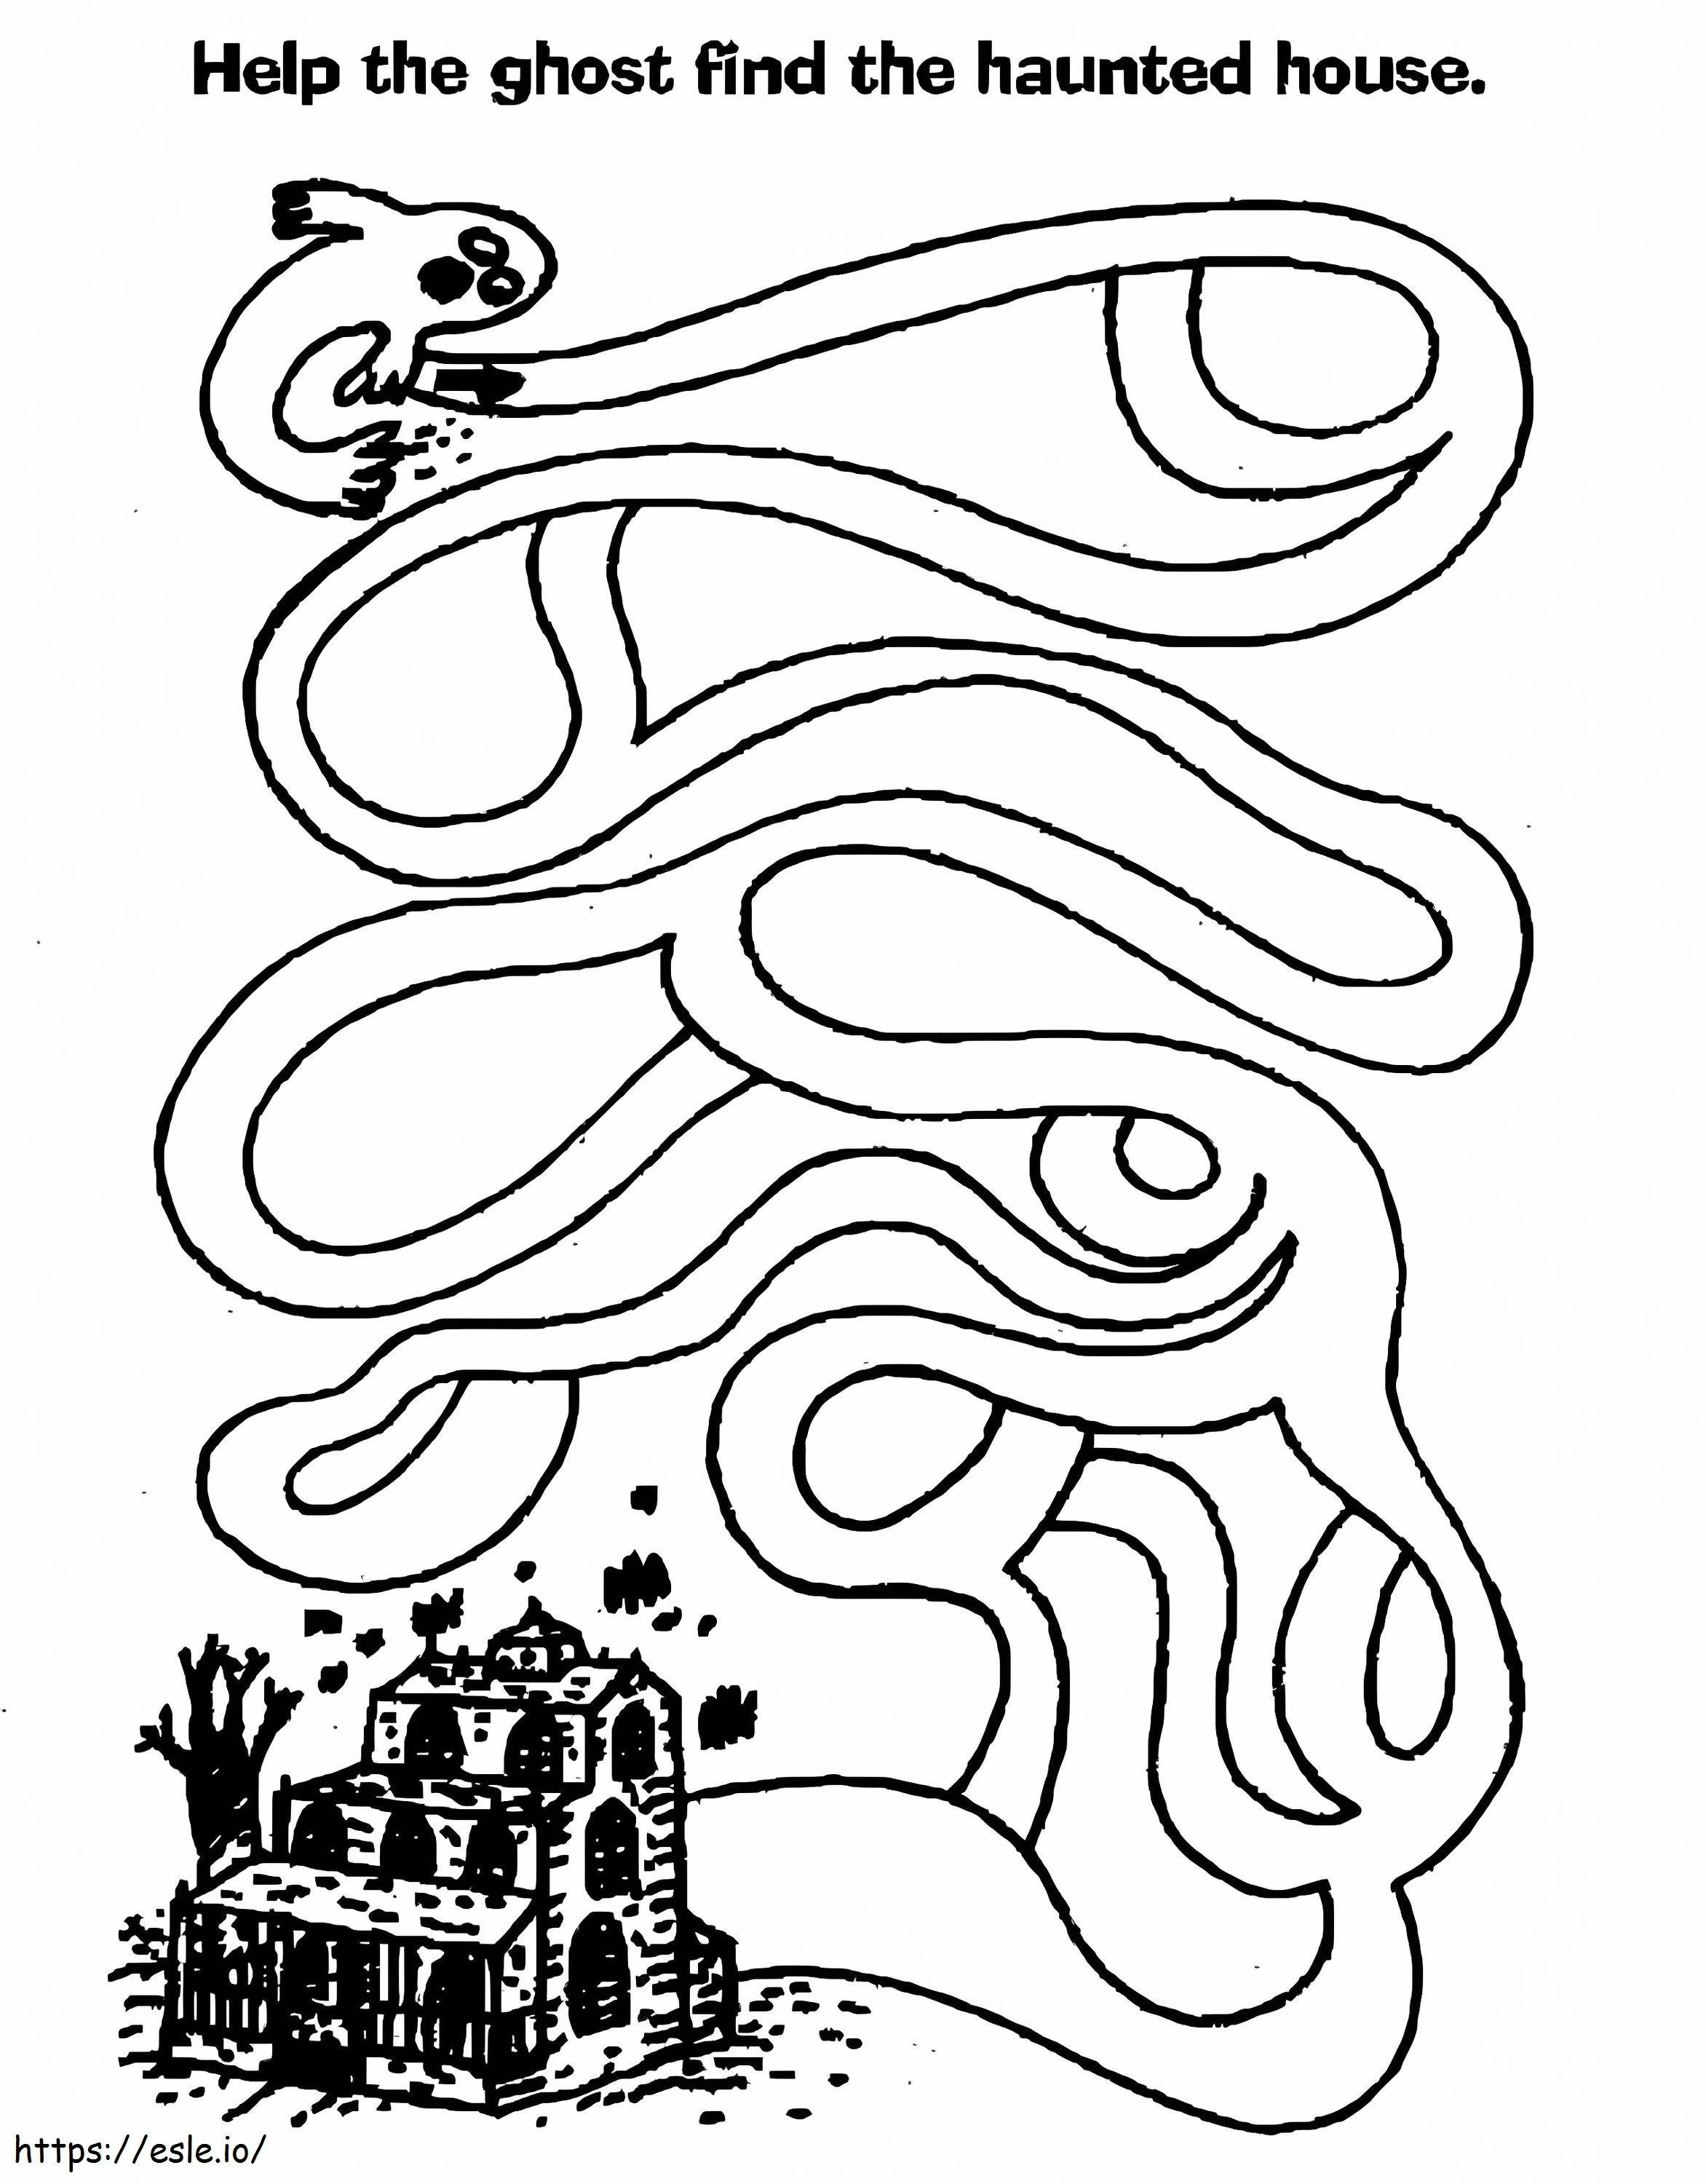 Haunted House Maze coloring page